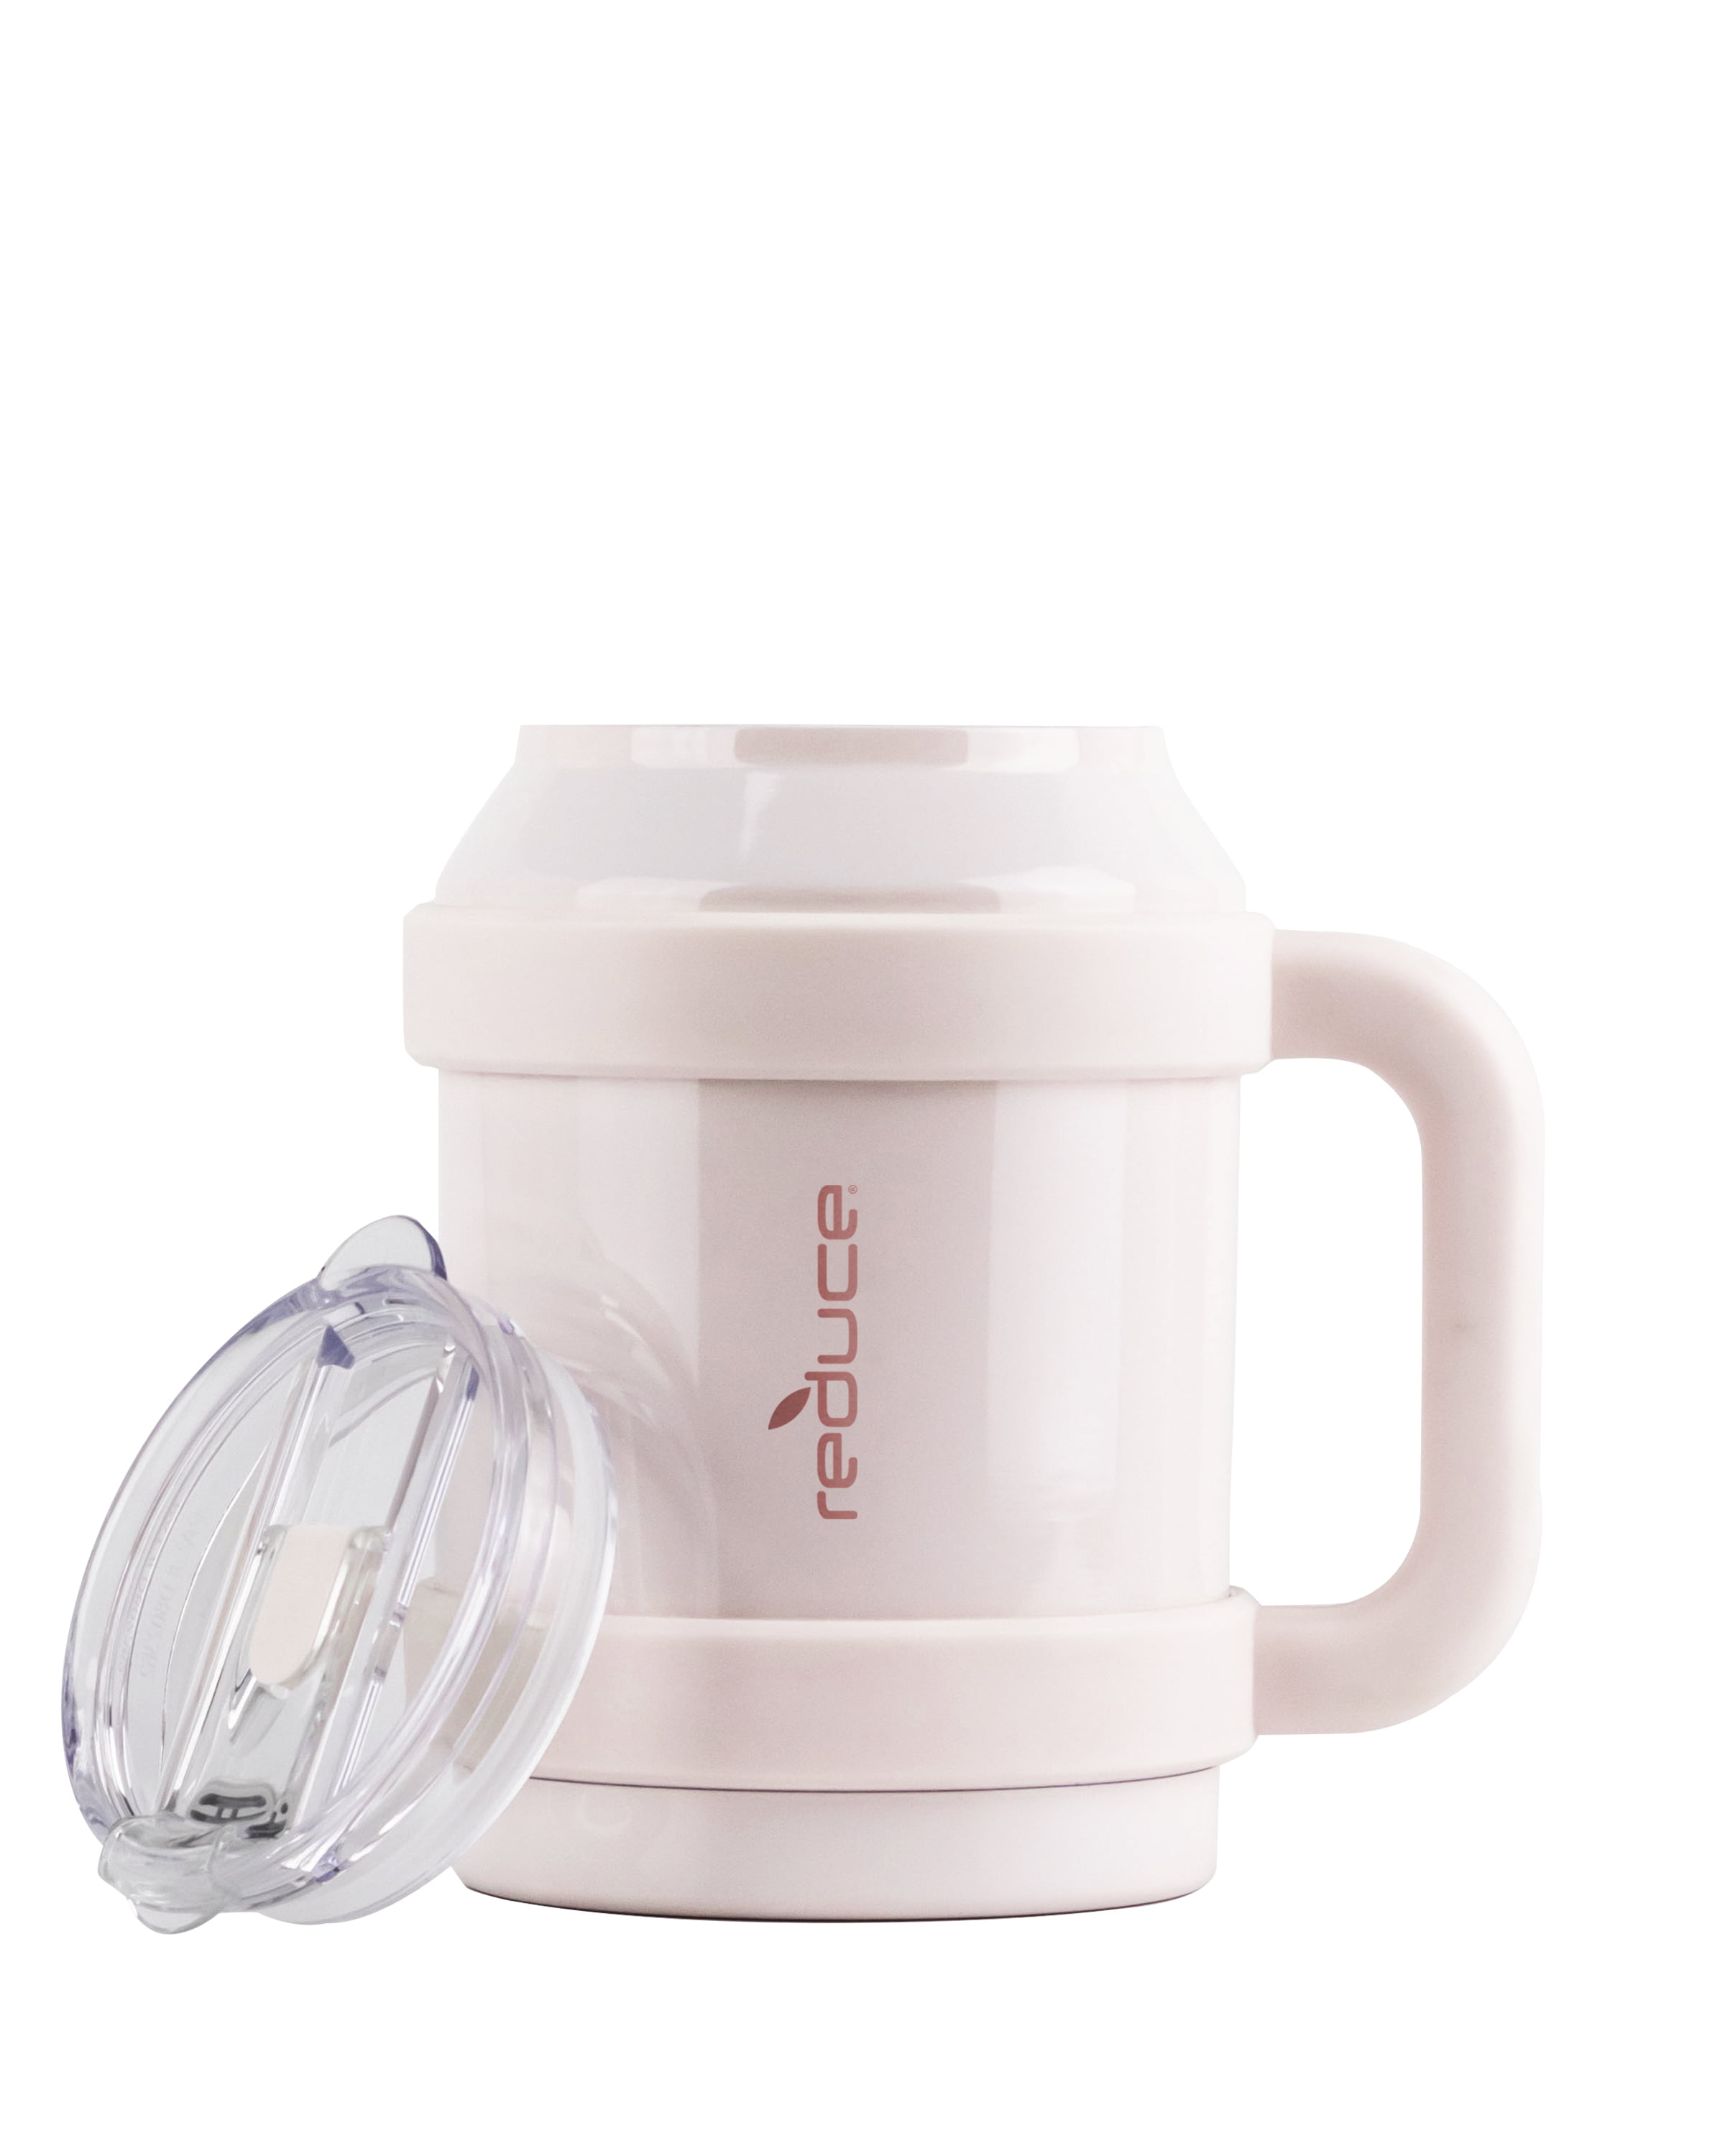  REDUCE brand Cold1 Tumblers or Mugs 20-24oz mouth Replacement  Lid (3.5 inch diameter) and Straw (10.6 inch) set, Clear, BPA Free,  Dishwasher safe, Durable, Reusable, Spill Proof Lid, Medium : Home